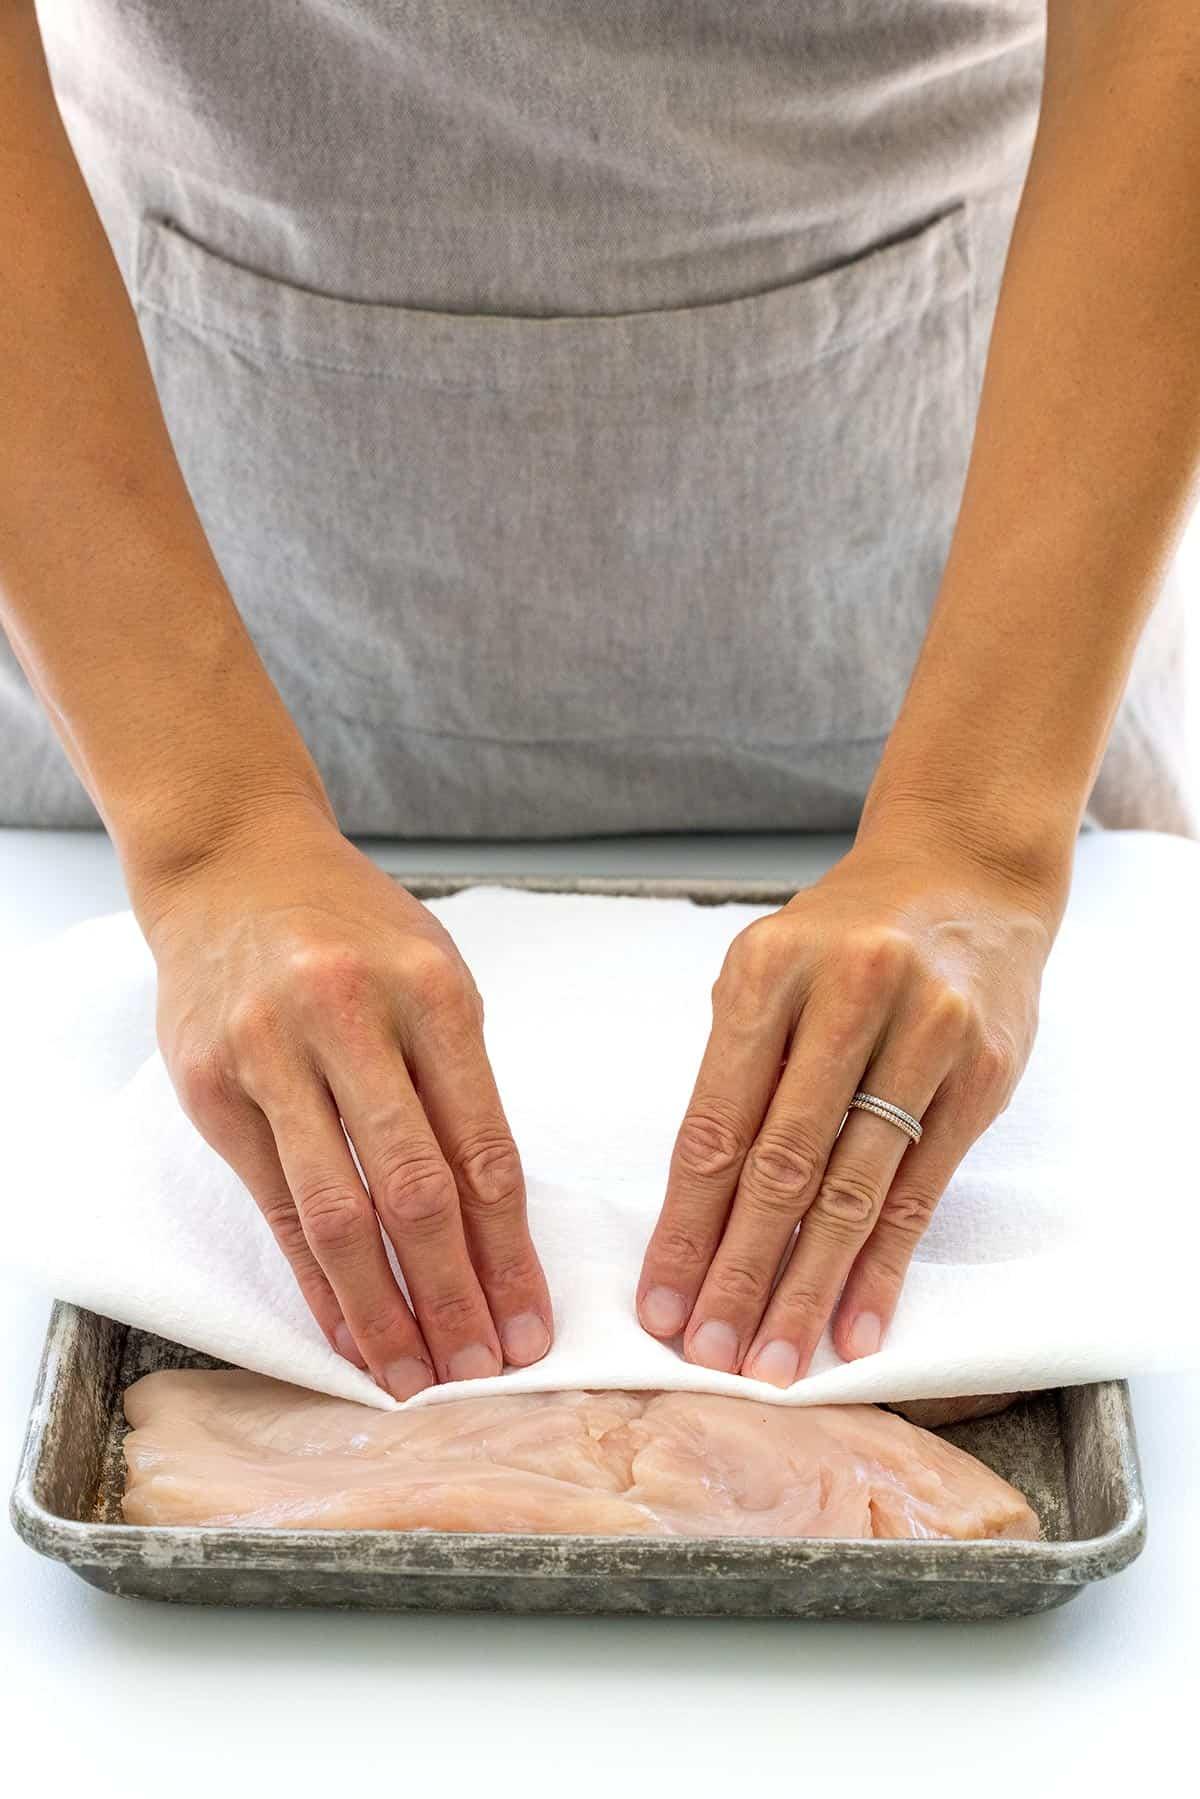 Drying the chicken's surface with paper towels